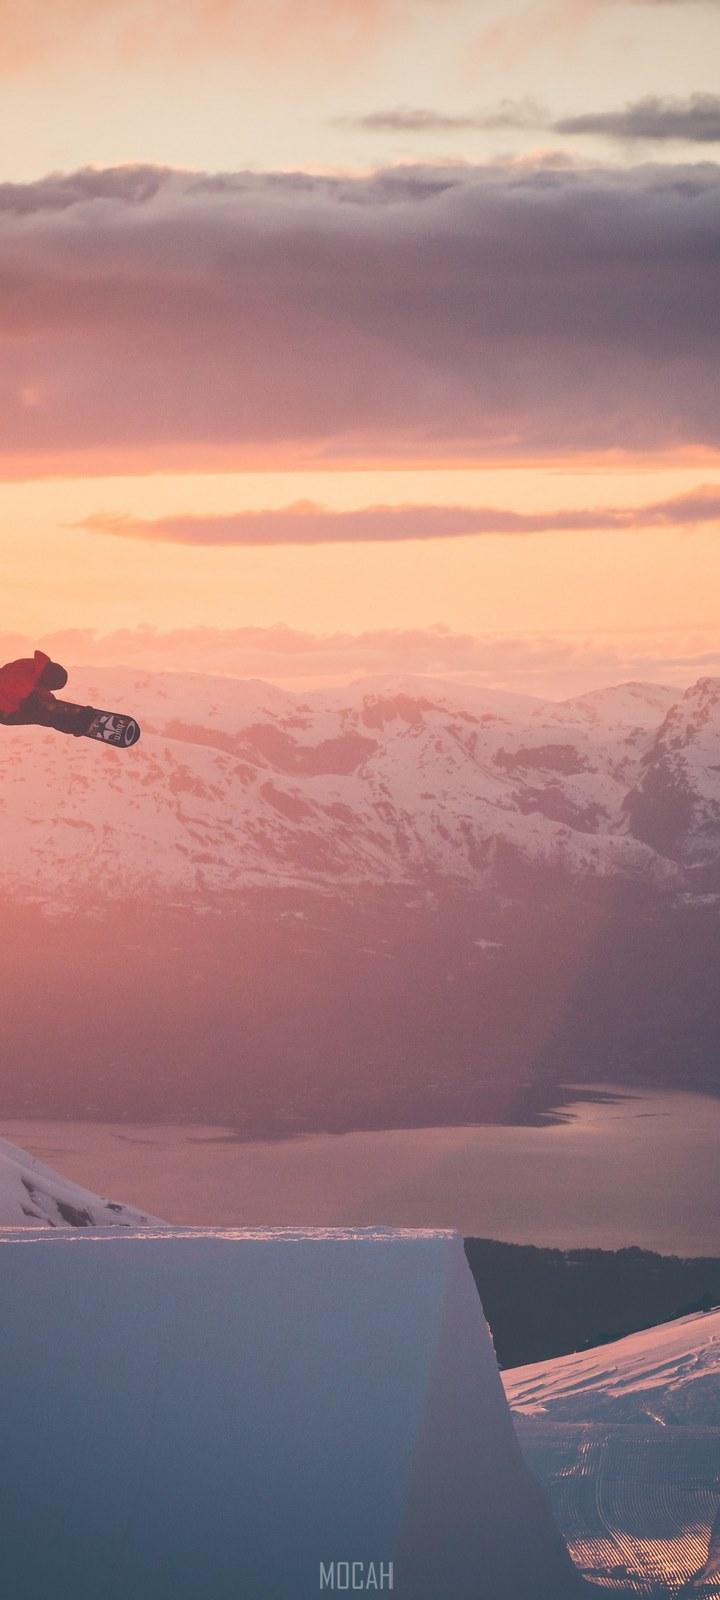 HD wallpaper, Samsung Galaxy A21 Wallpaper Full Hd, 720X1600, Snowboarder In Flight, A Snowboarder Is Airborne Surrounded By Golden Skies And Snowy Mountains